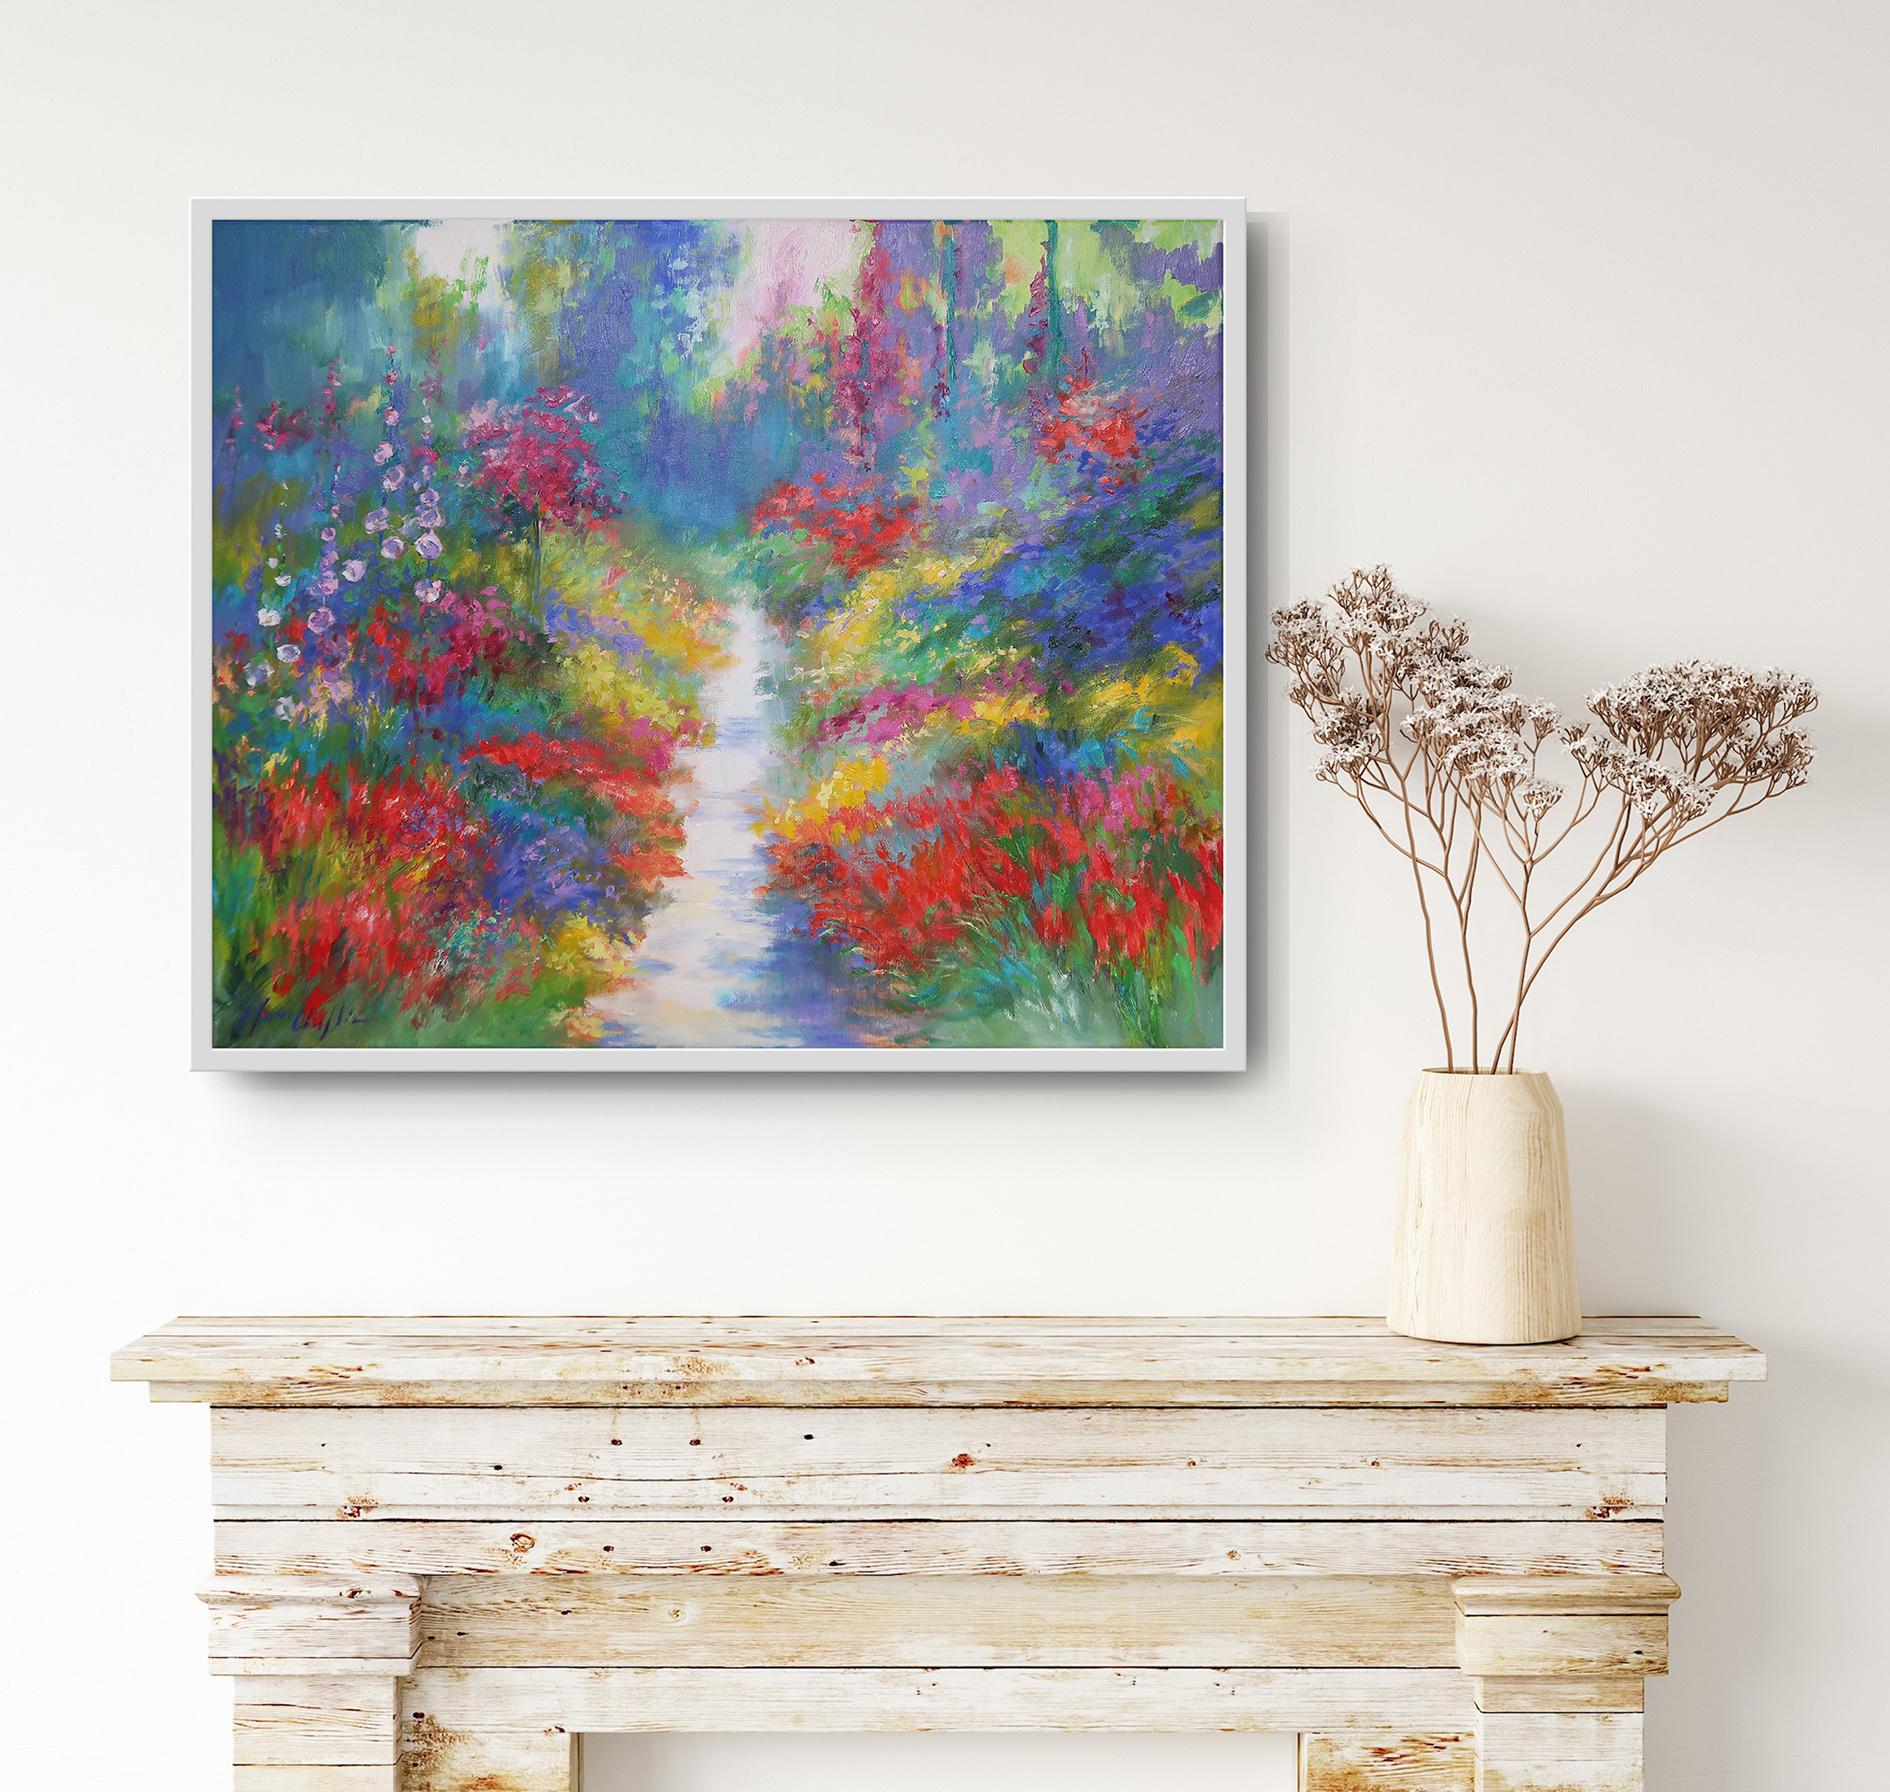 Hollyhocks Season at the Money Garden in Giveny  - Abstract Impressionist Painting by Mary Chaplin